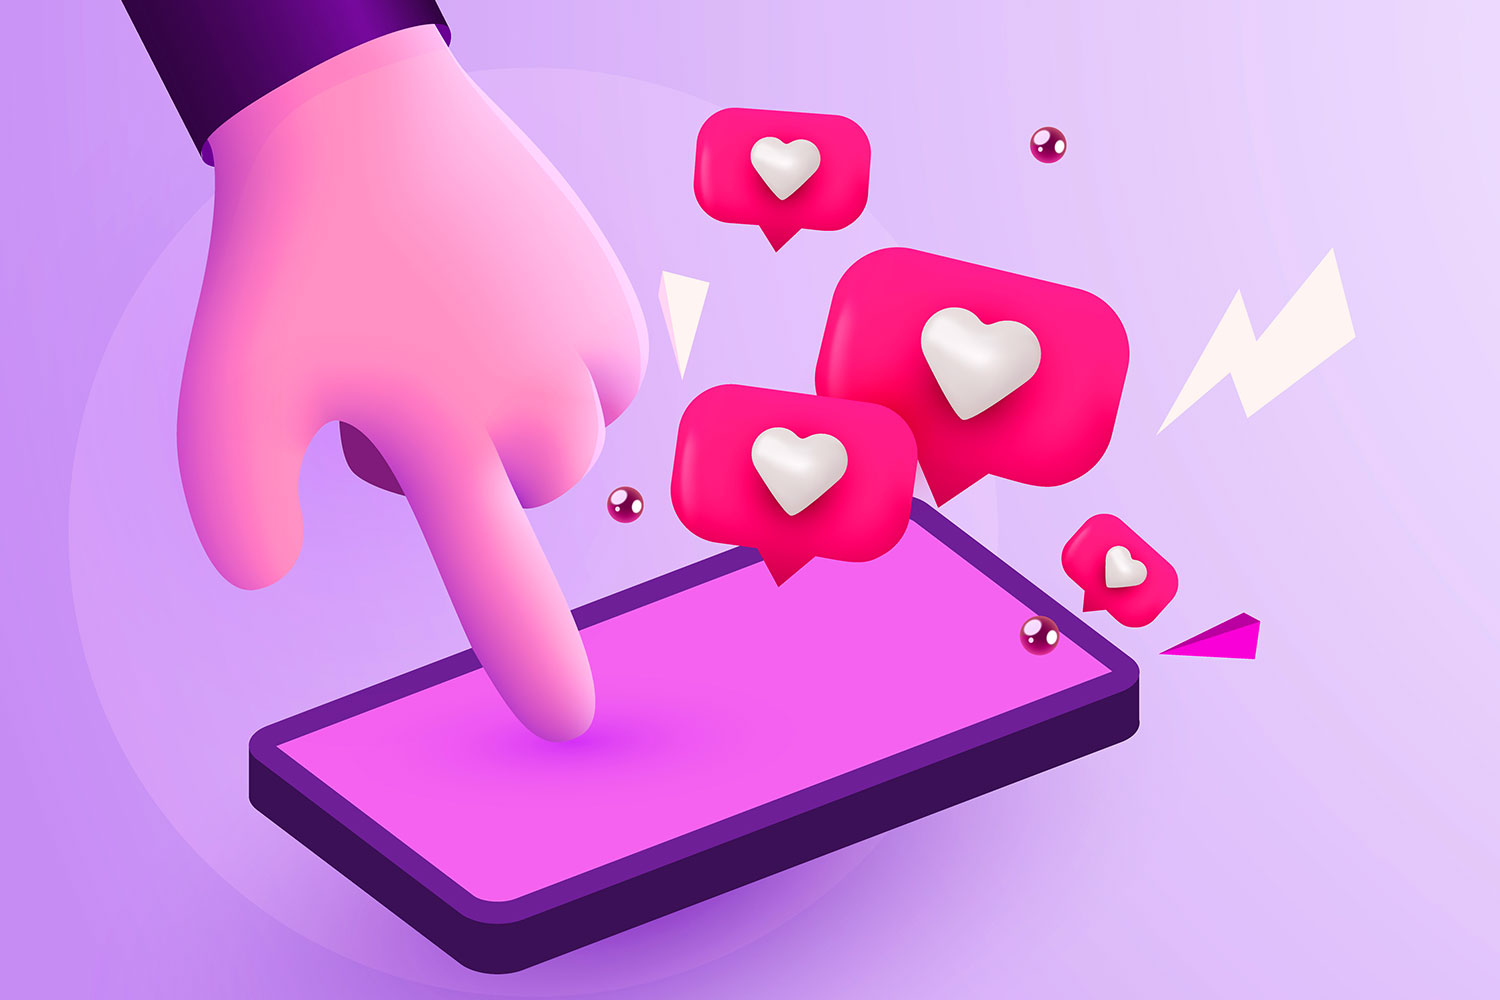 A cartoon hand taps the screen of a smart phone and message bubbles with hearts are popping out.